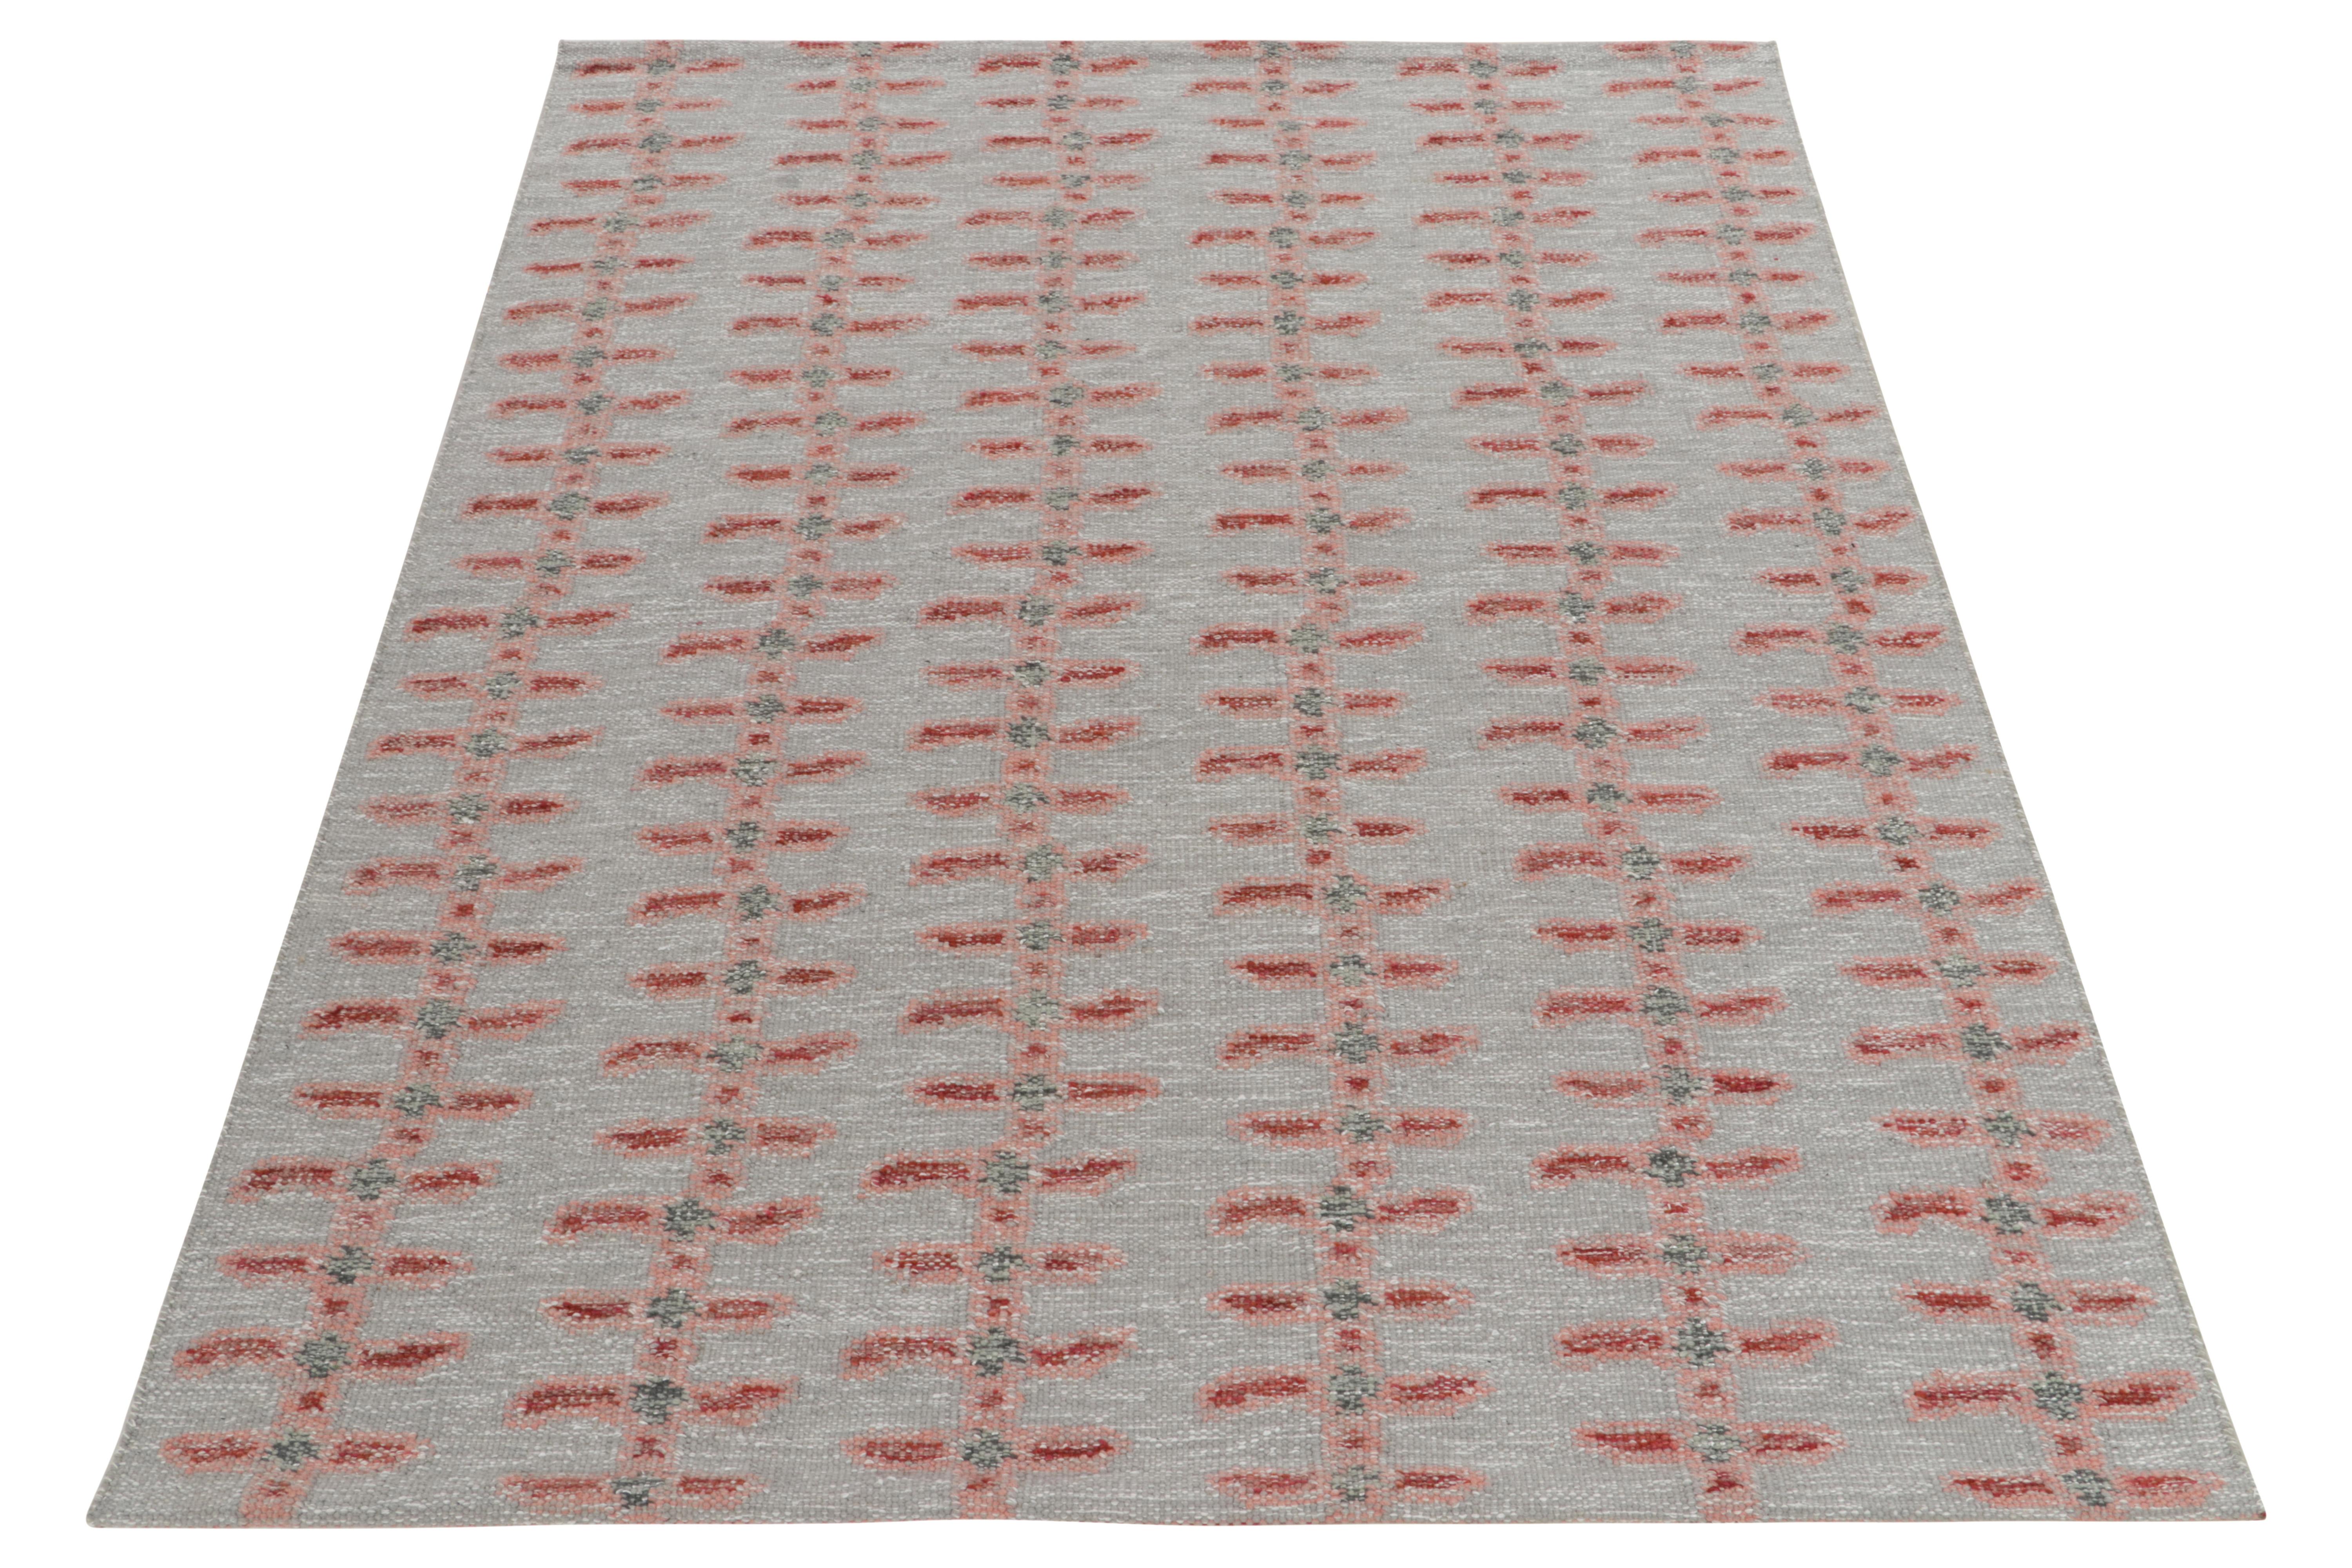 Handwoven in fine quality wool, a 6x8 kilim from our award-winning repertoire of Scandinavian flatweaves. The gray toned rug hosts geometric symmetry in bright red & soft pink for a delicious, depthful color play in such natural movement. Further